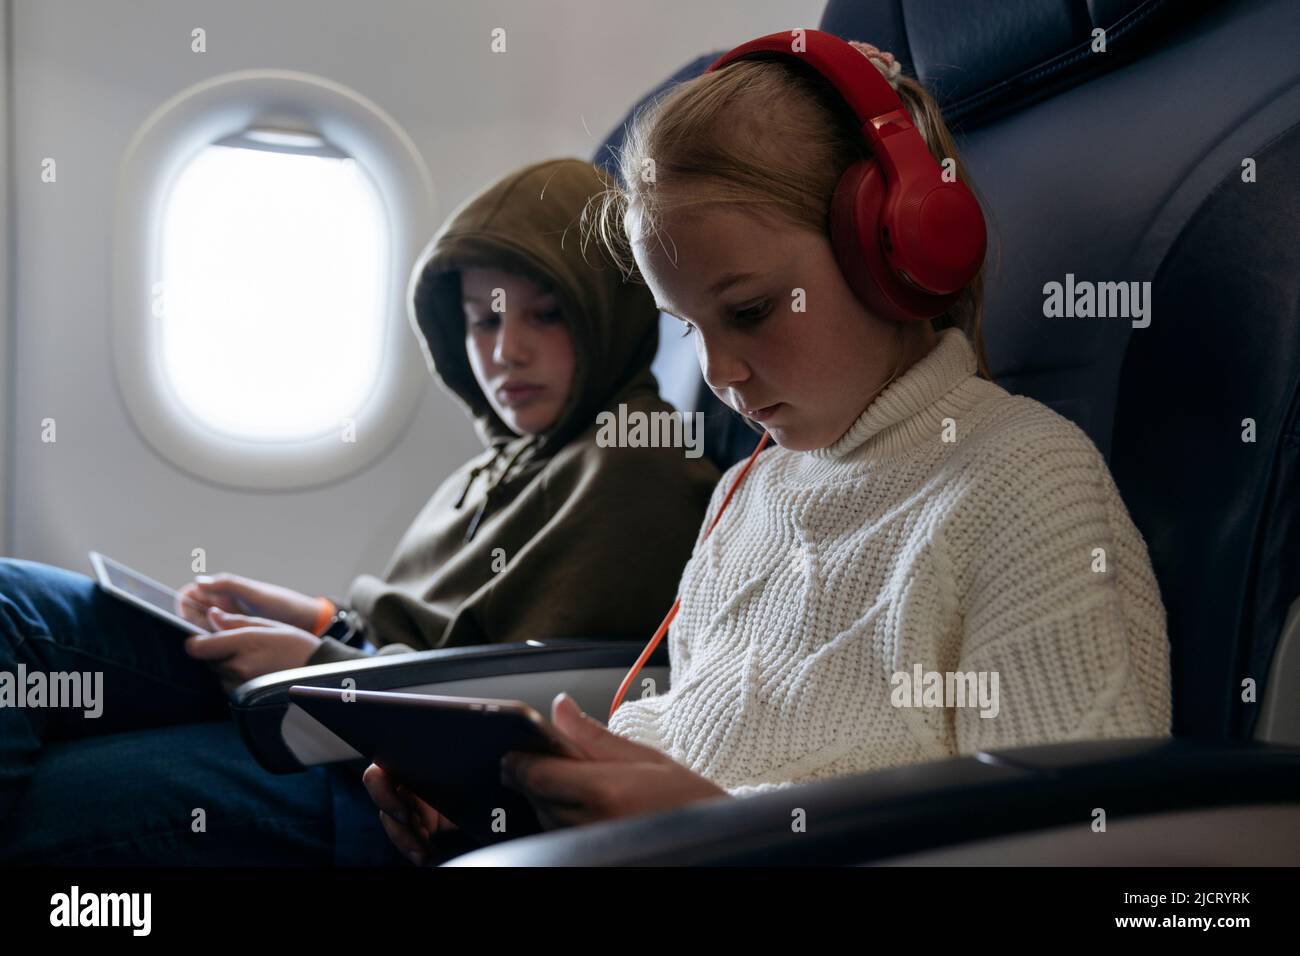 Children are flying on a plane and looking at a tablet. Stock Photo